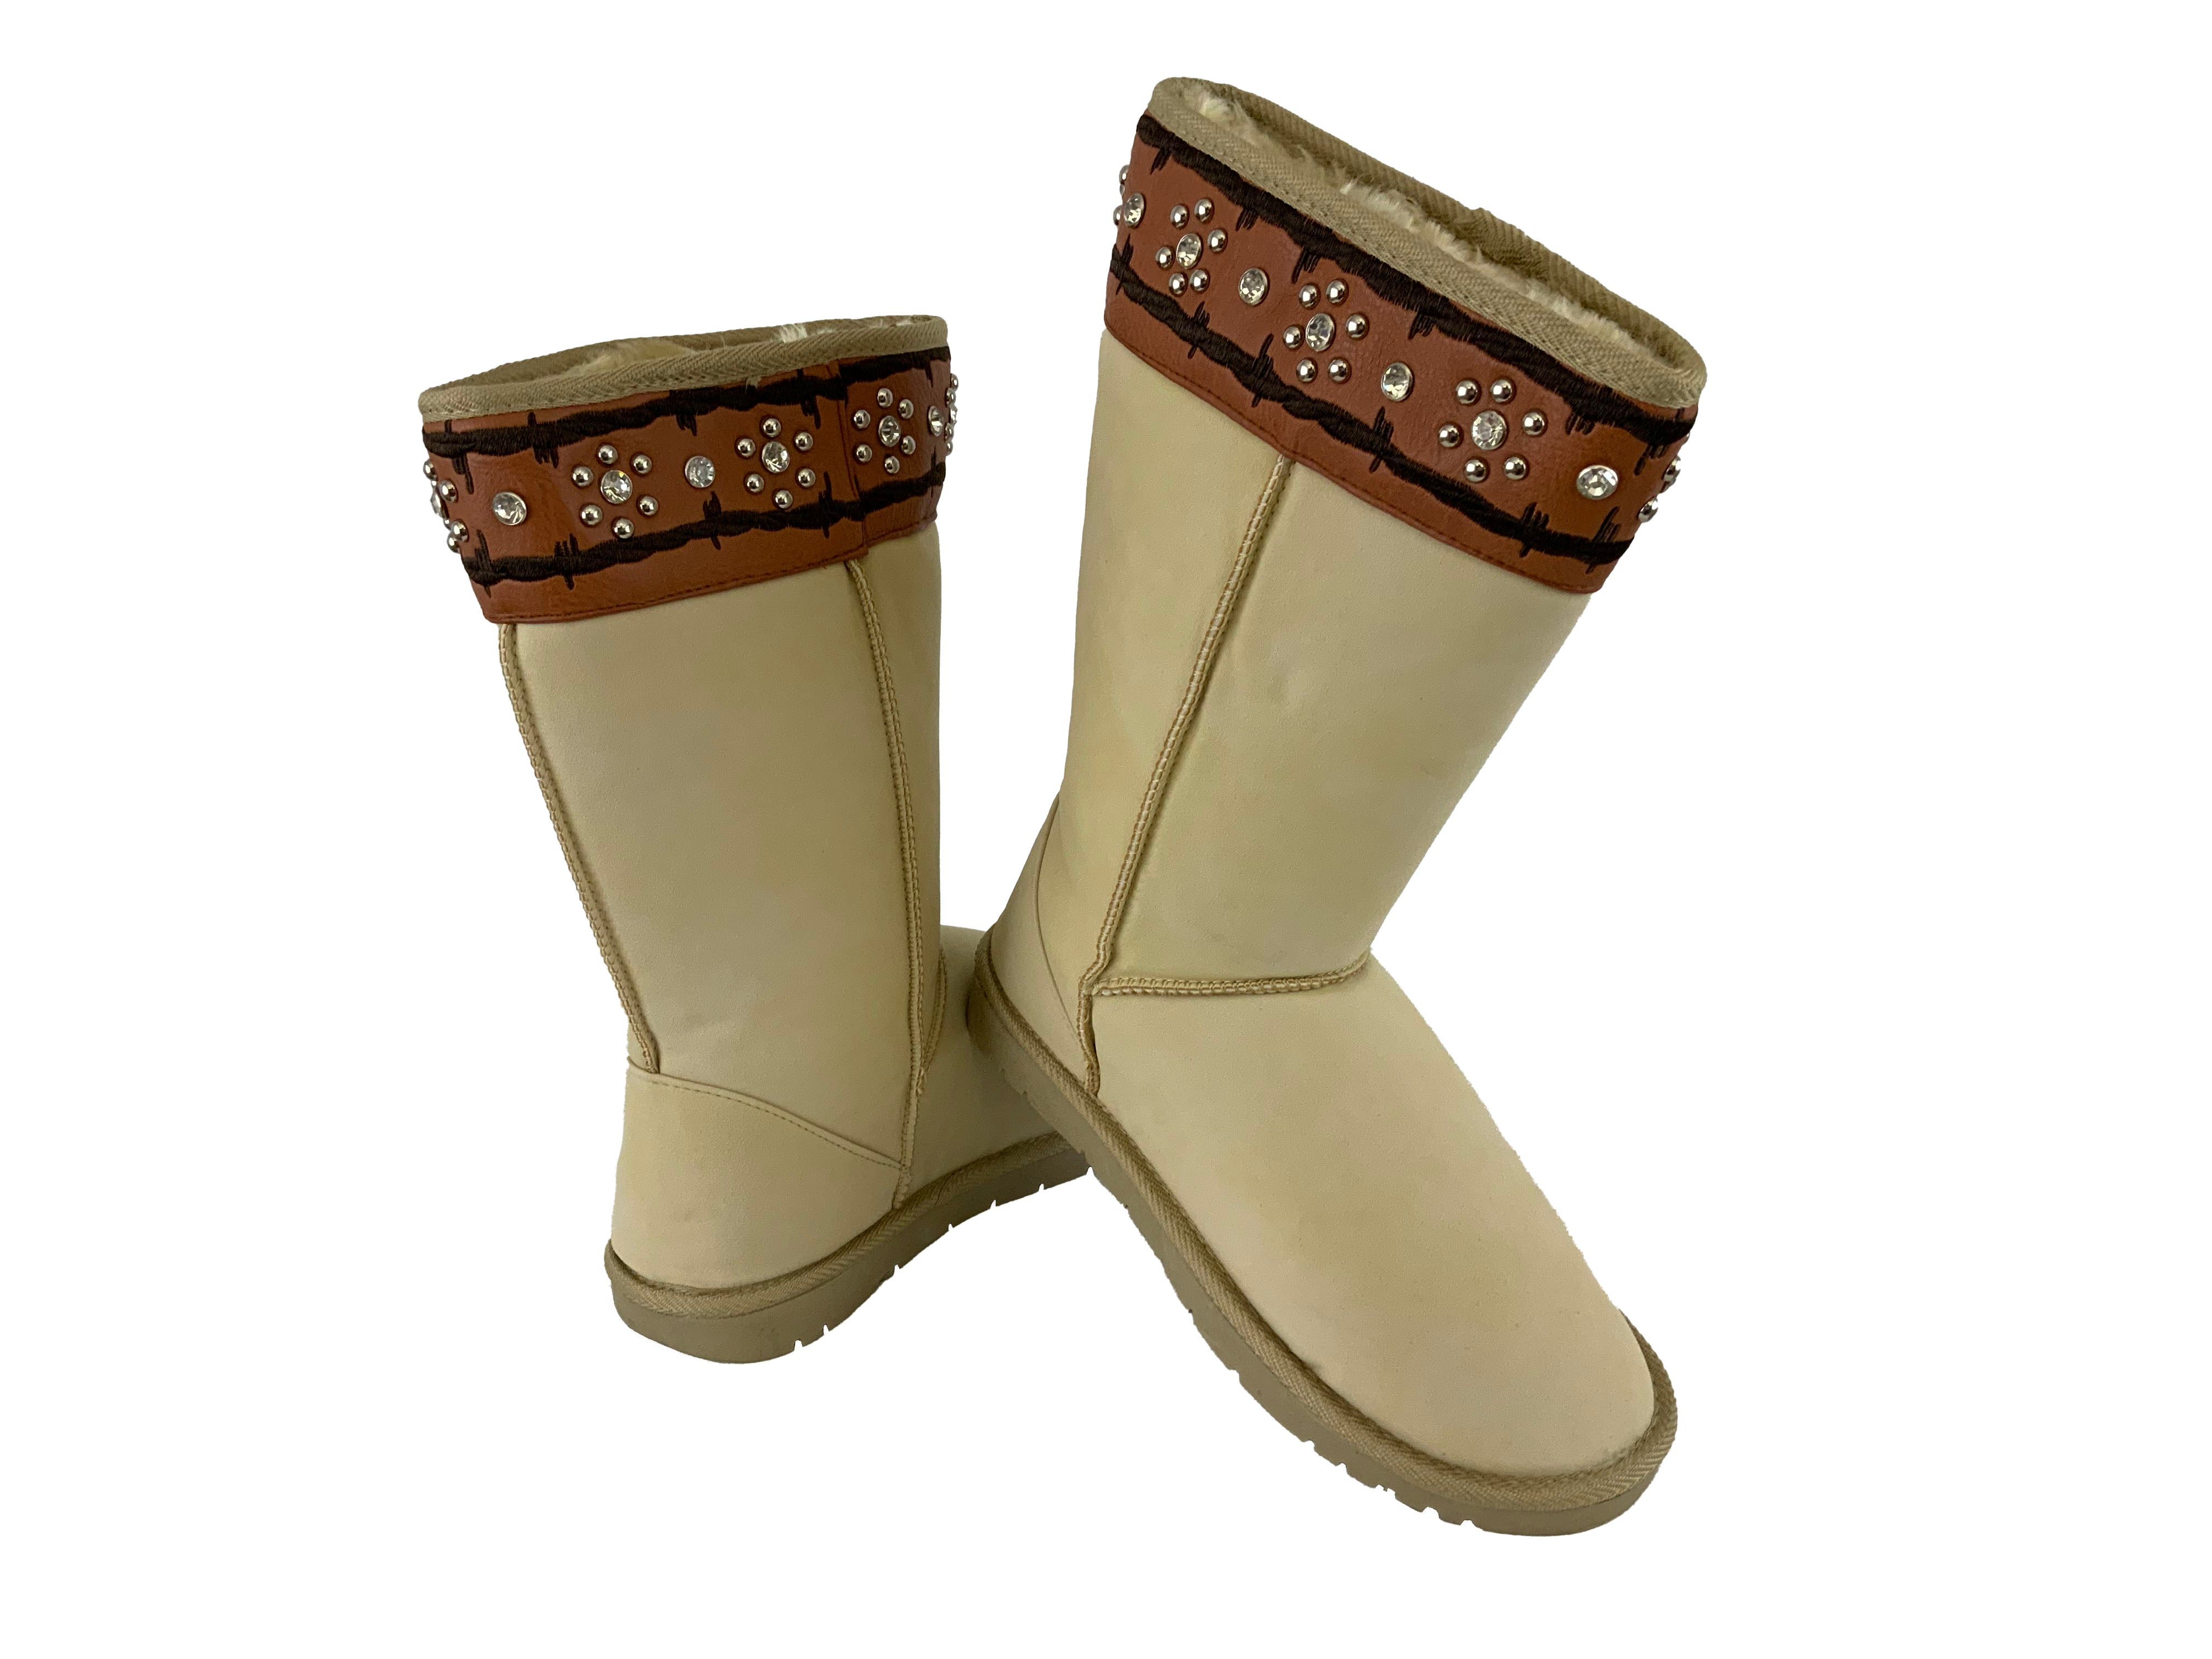 BA3341-A: Sand suede tall boot with ivory leather trim accented with barbed wire embroidery and cr Primary Showman Saddles and Tack   